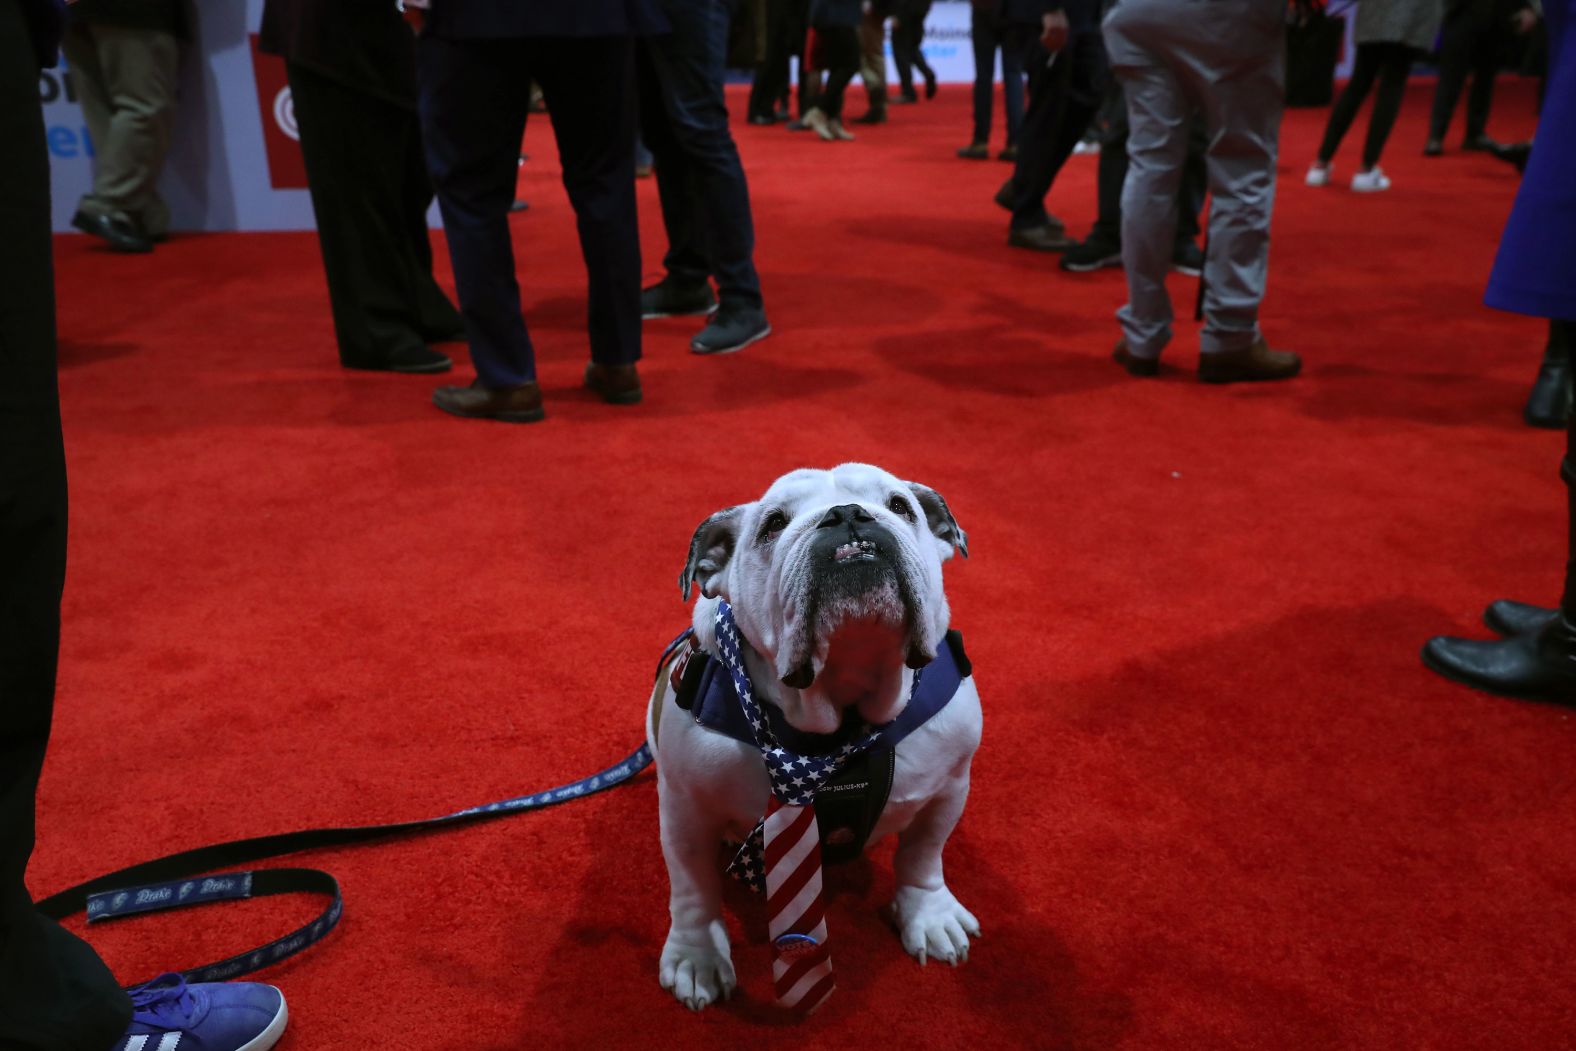 Griff, Drake University's mascot, hangs out in the "spin room" after the debate.